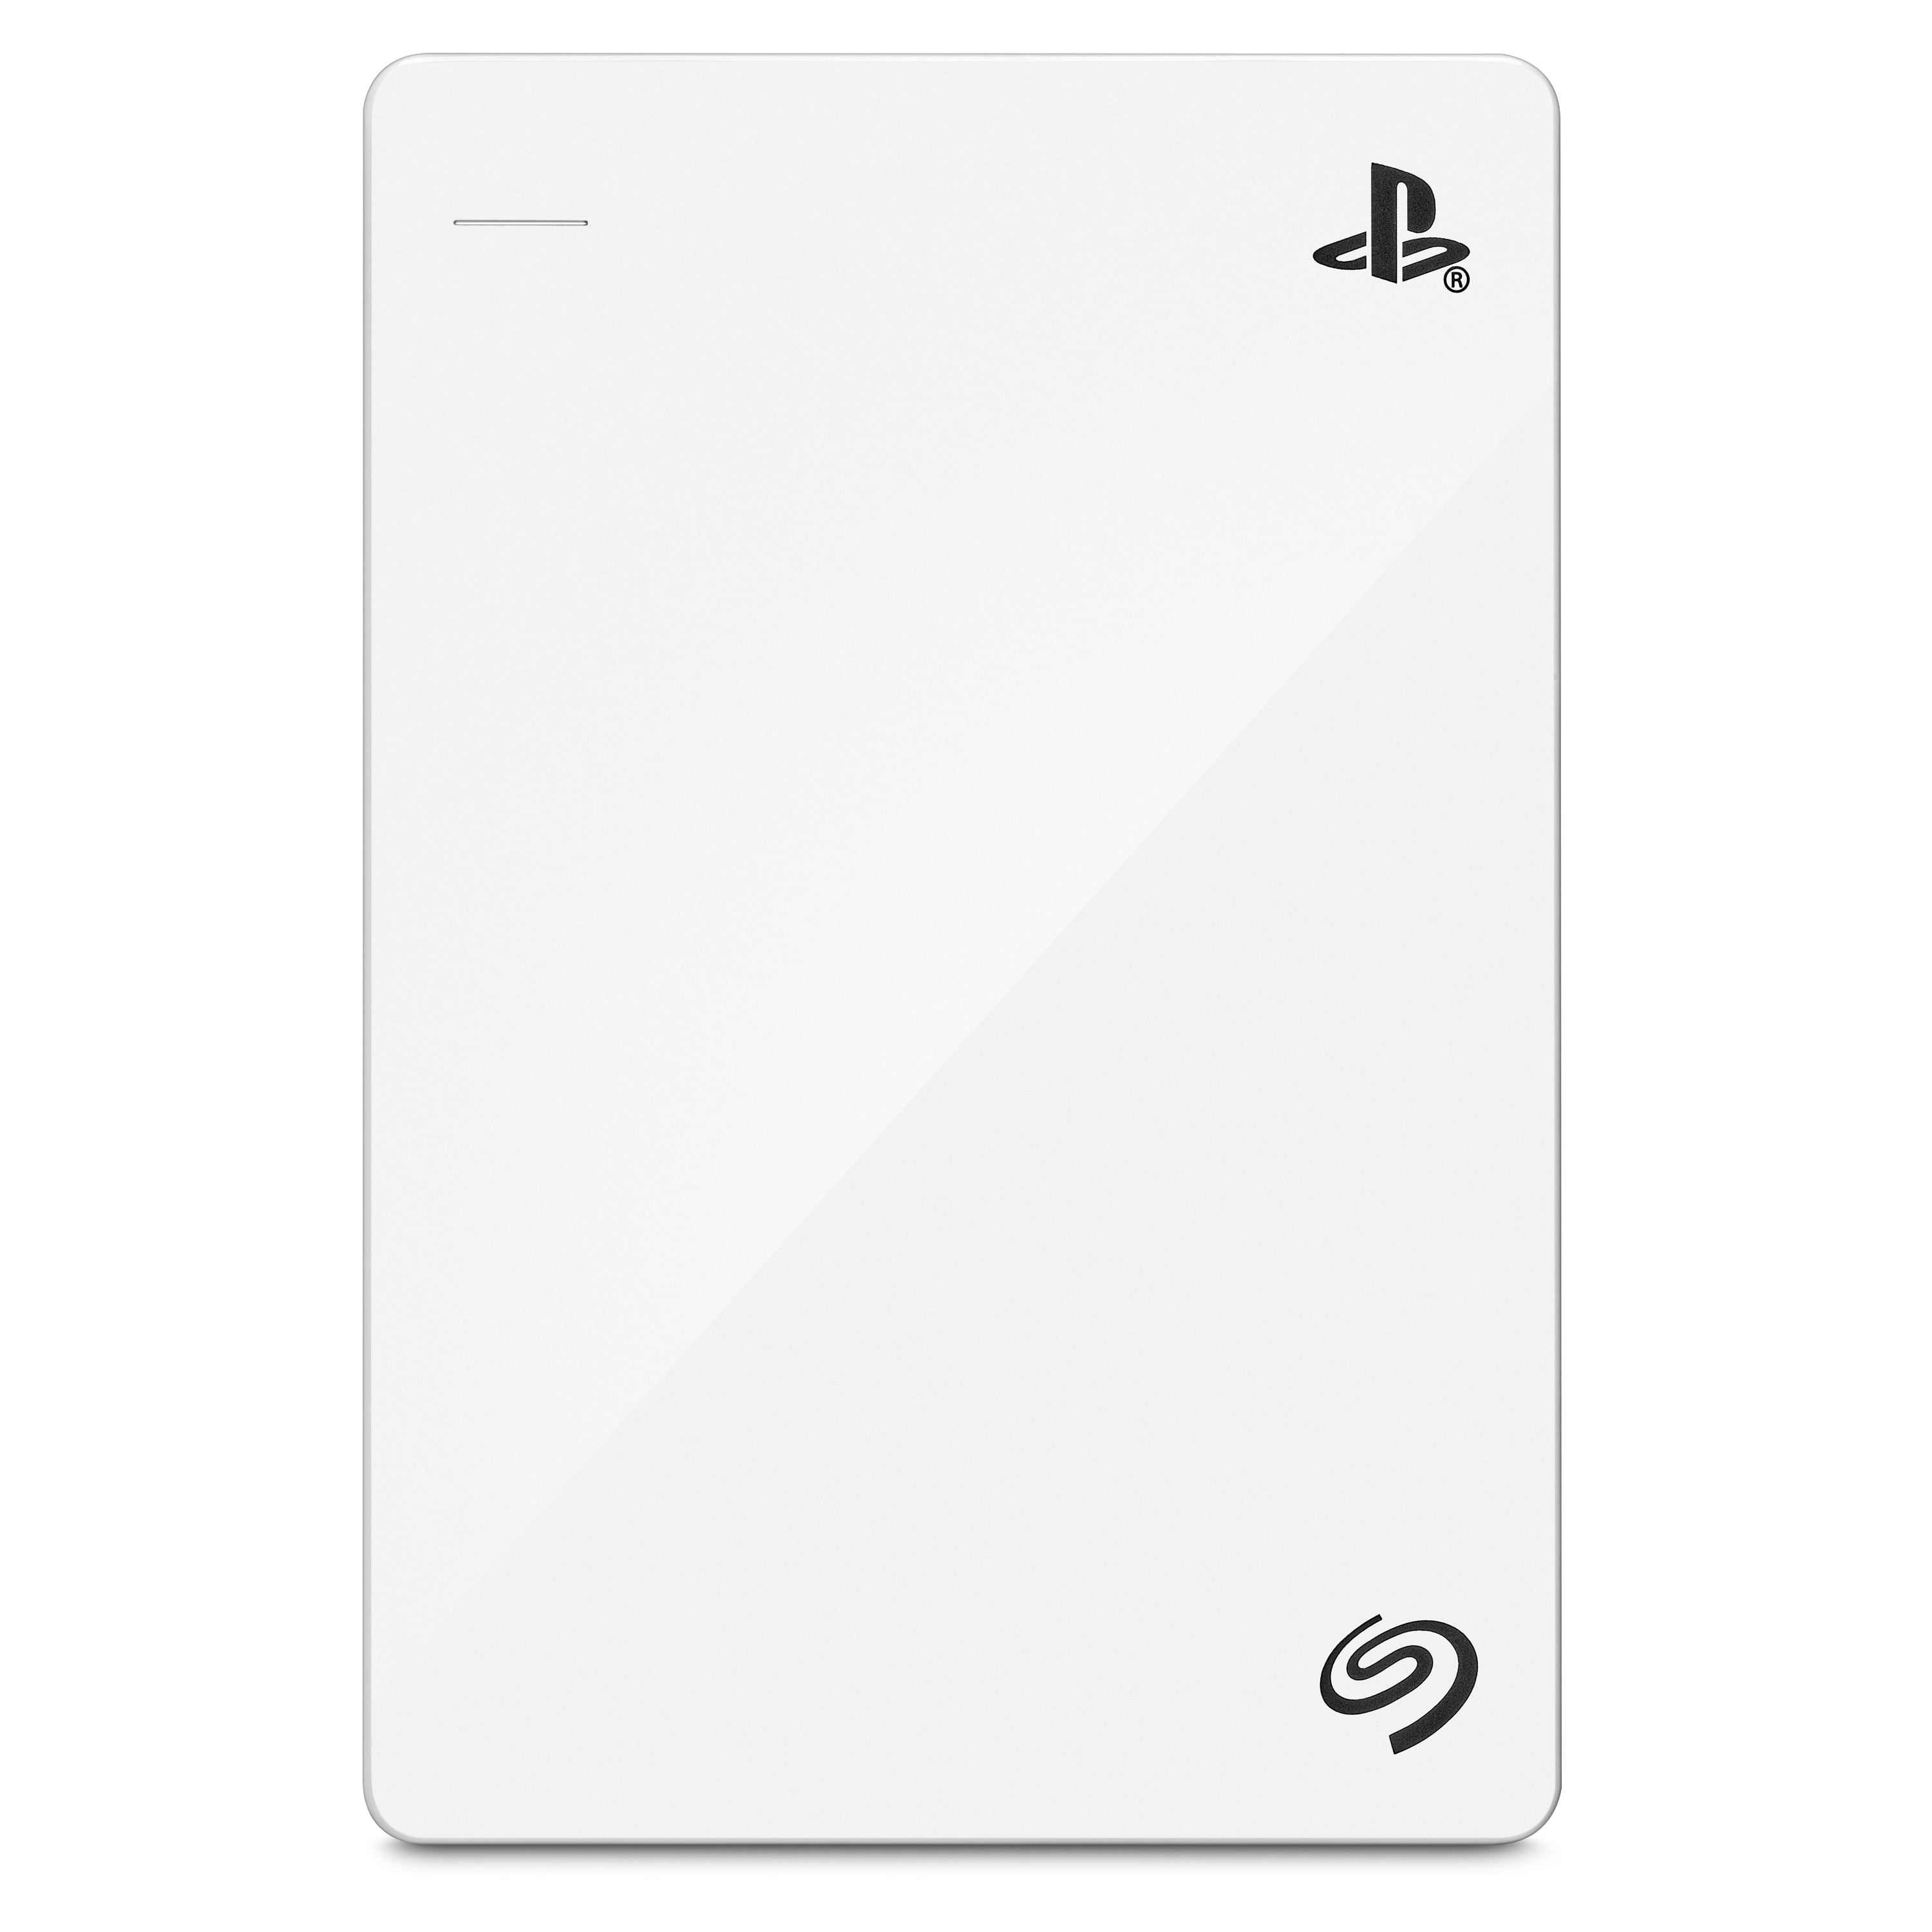 visual Duplicate Straight Seagate Game Drive for PlayStation Consoles 2TB External Portable Hard Drive  USB 3.0 Officially Licensed - White - Walmart.com